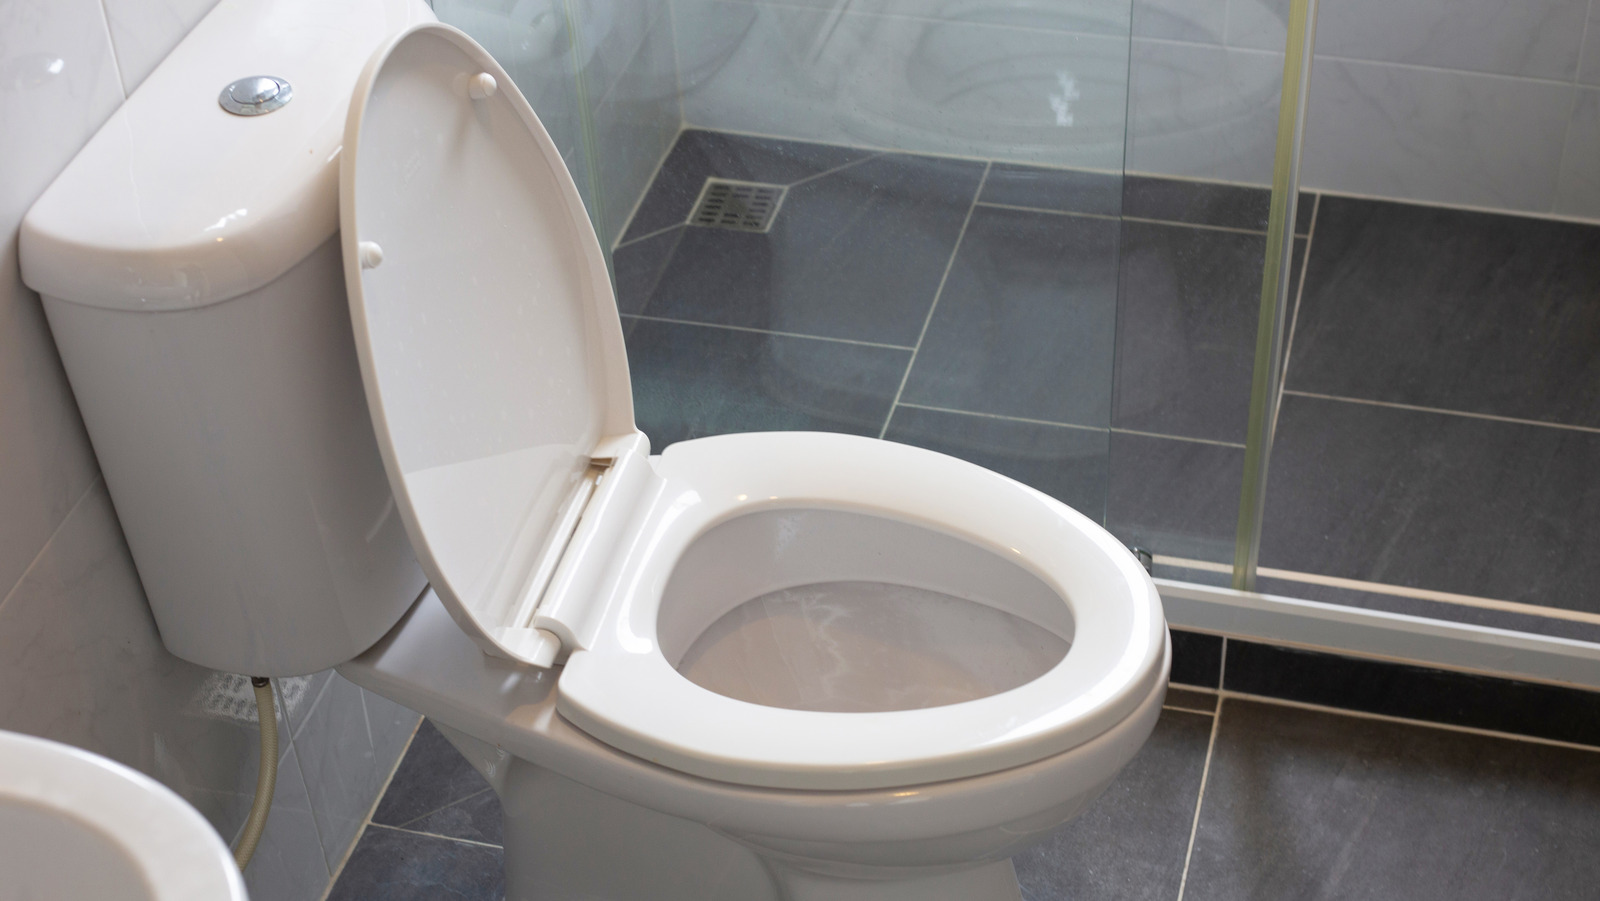 What To Put In Toilet Bowl While On Vacation